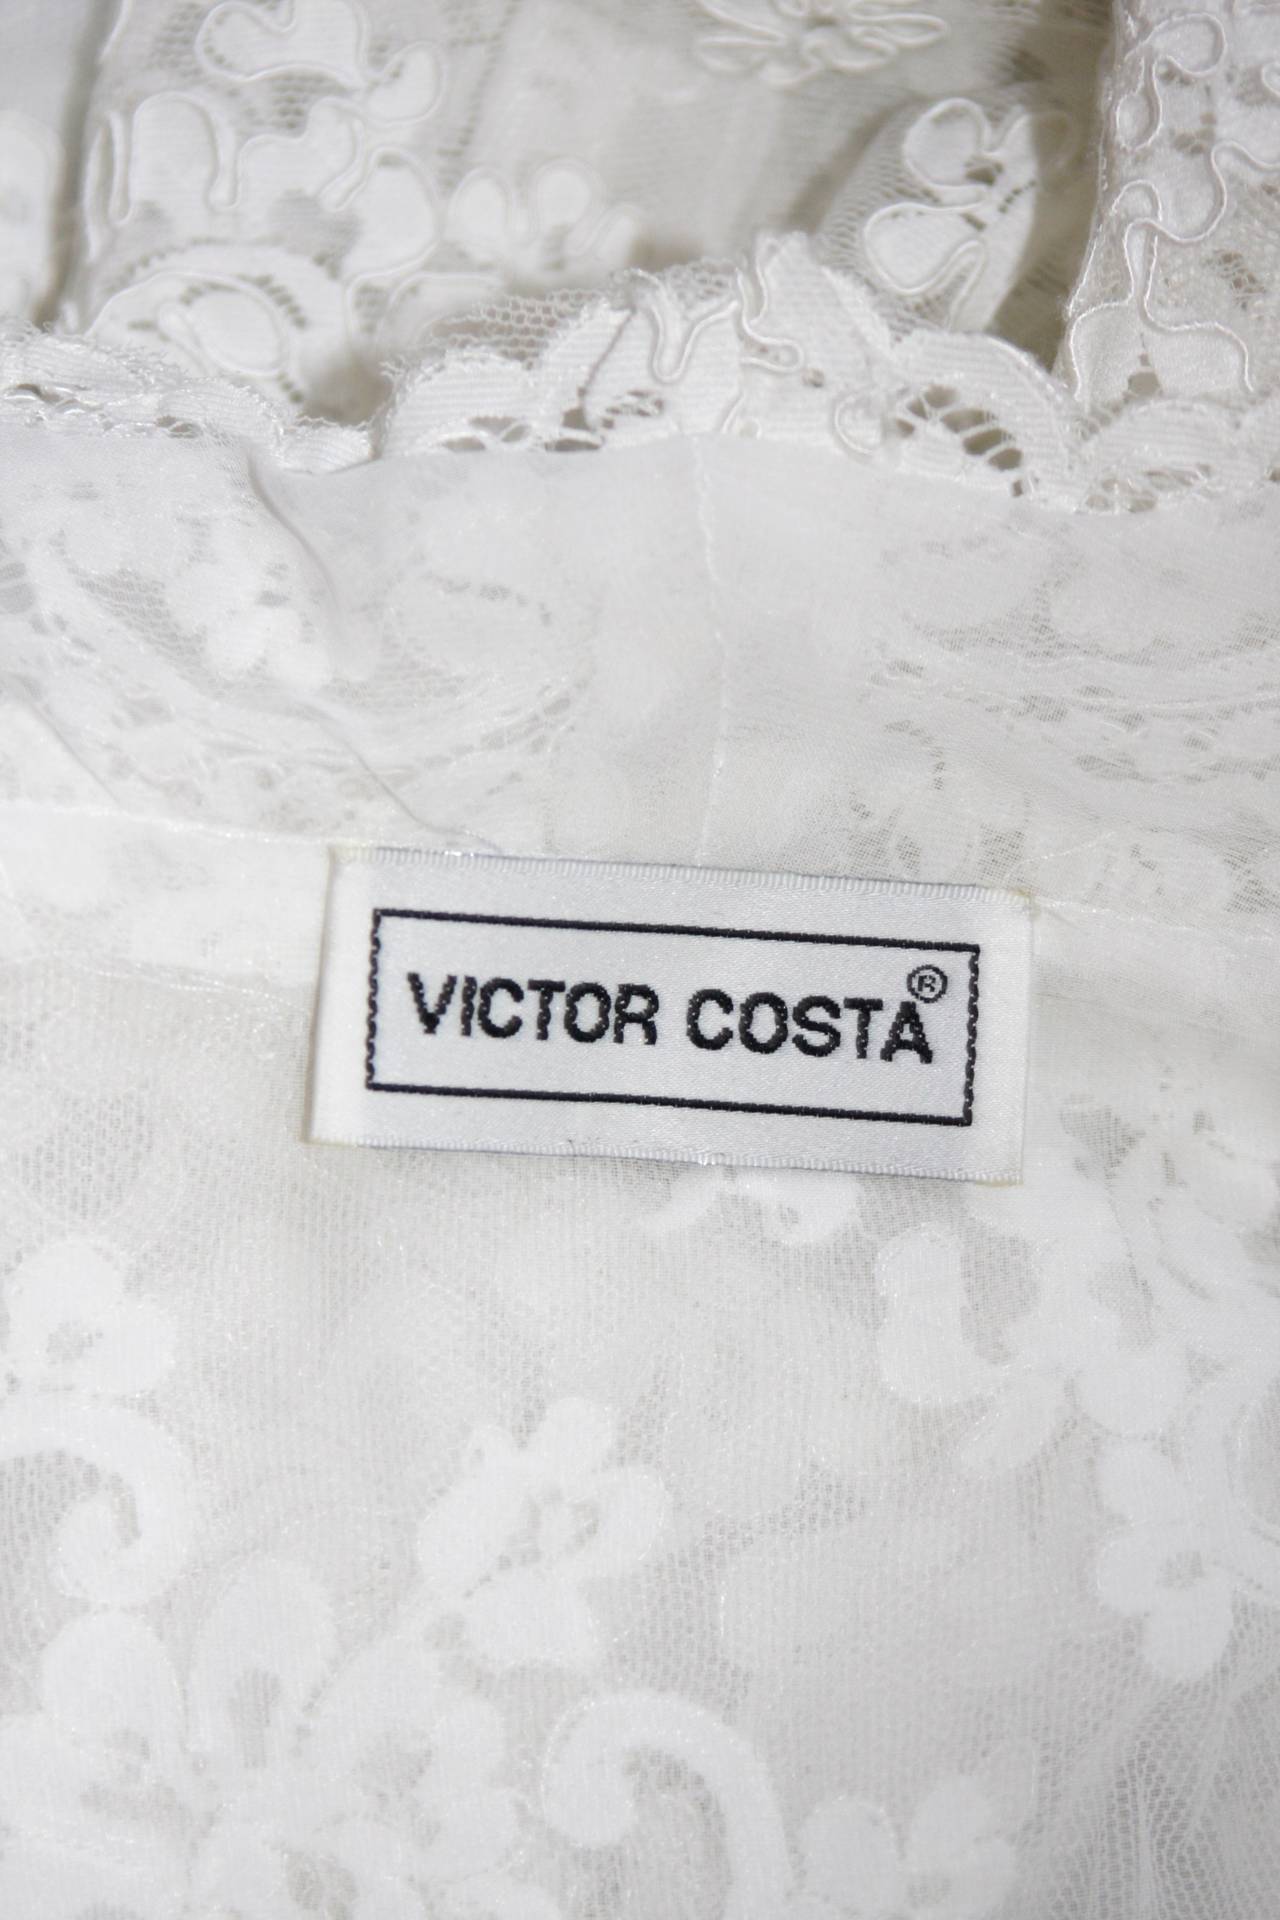 Victor Costa White Lace Scalloped Edge Long Sleeve Blouse Size 4 6 8 In Excellent Condition For Sale In Los Angeles, CA